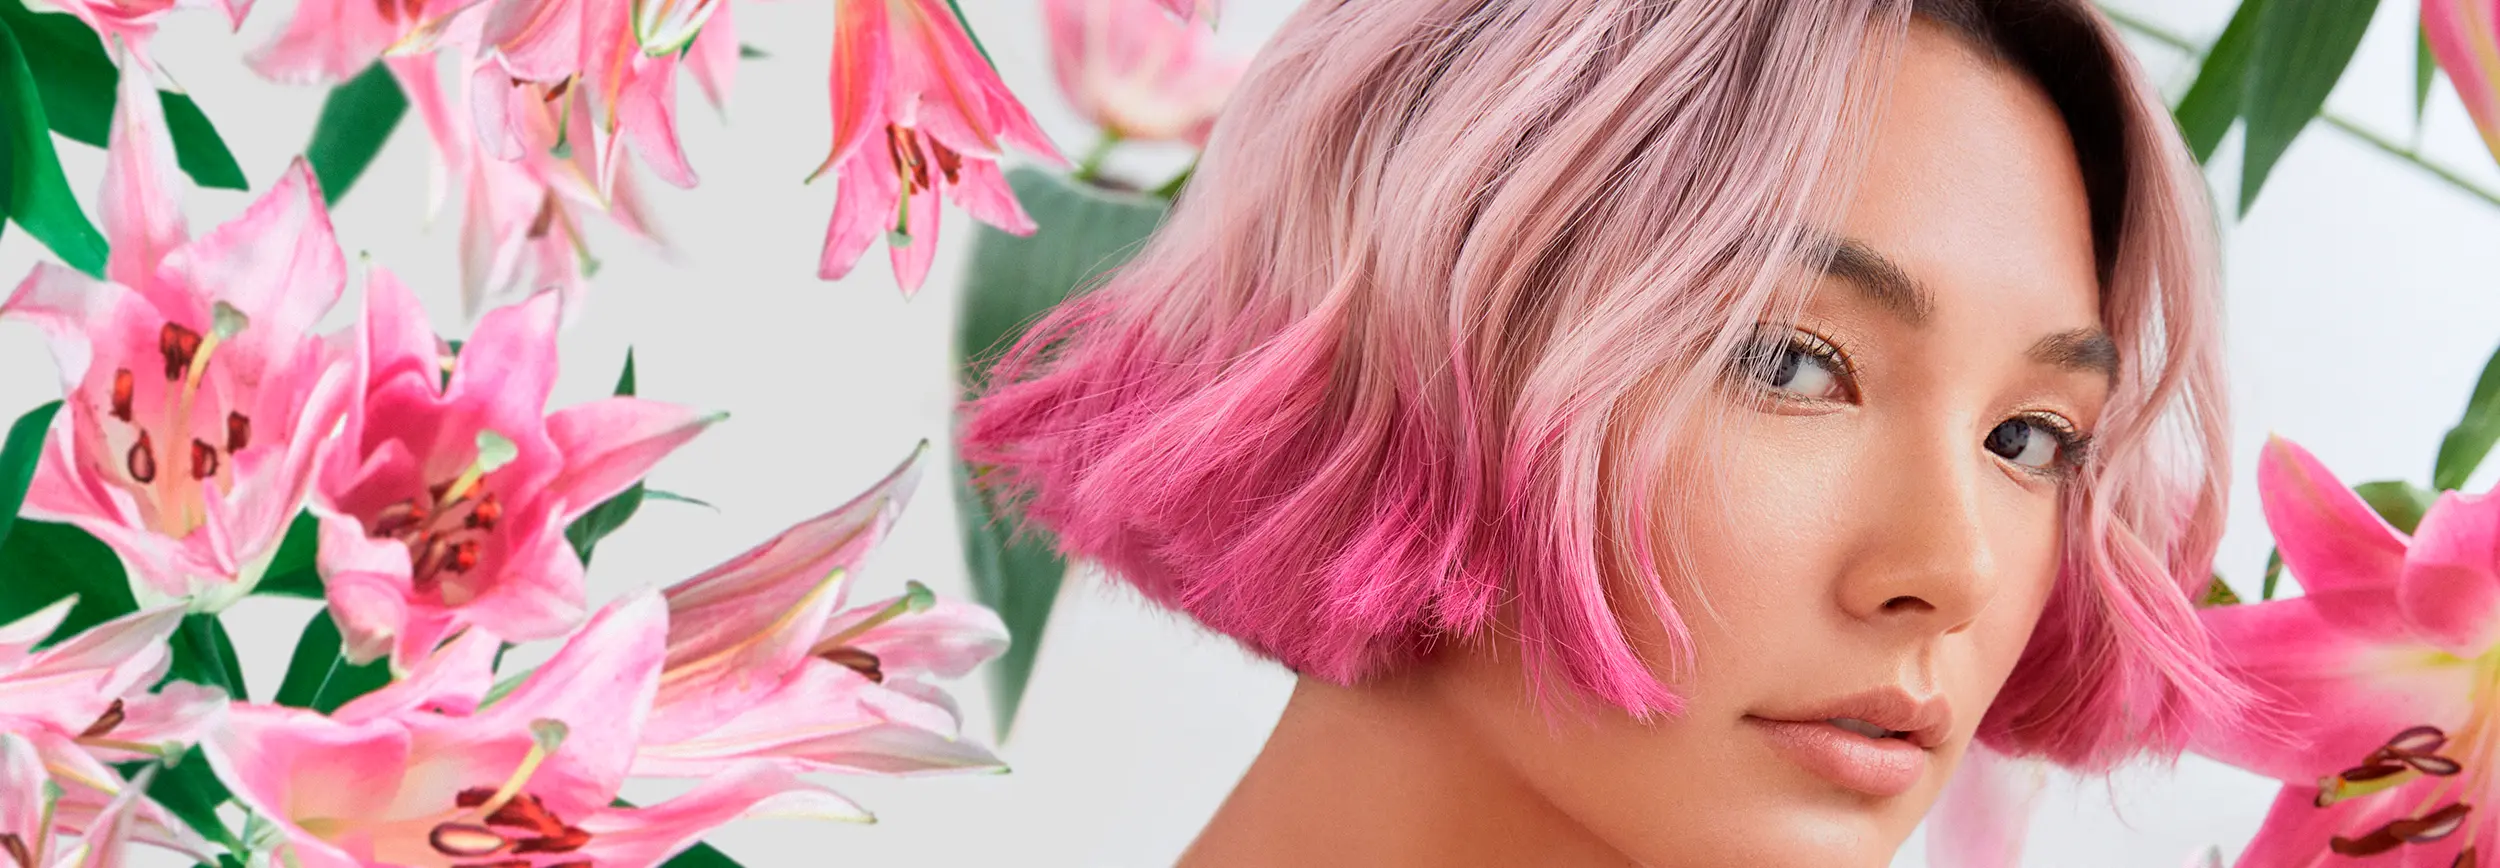 Dye Your Hair Pink With This Celeb Inspiration